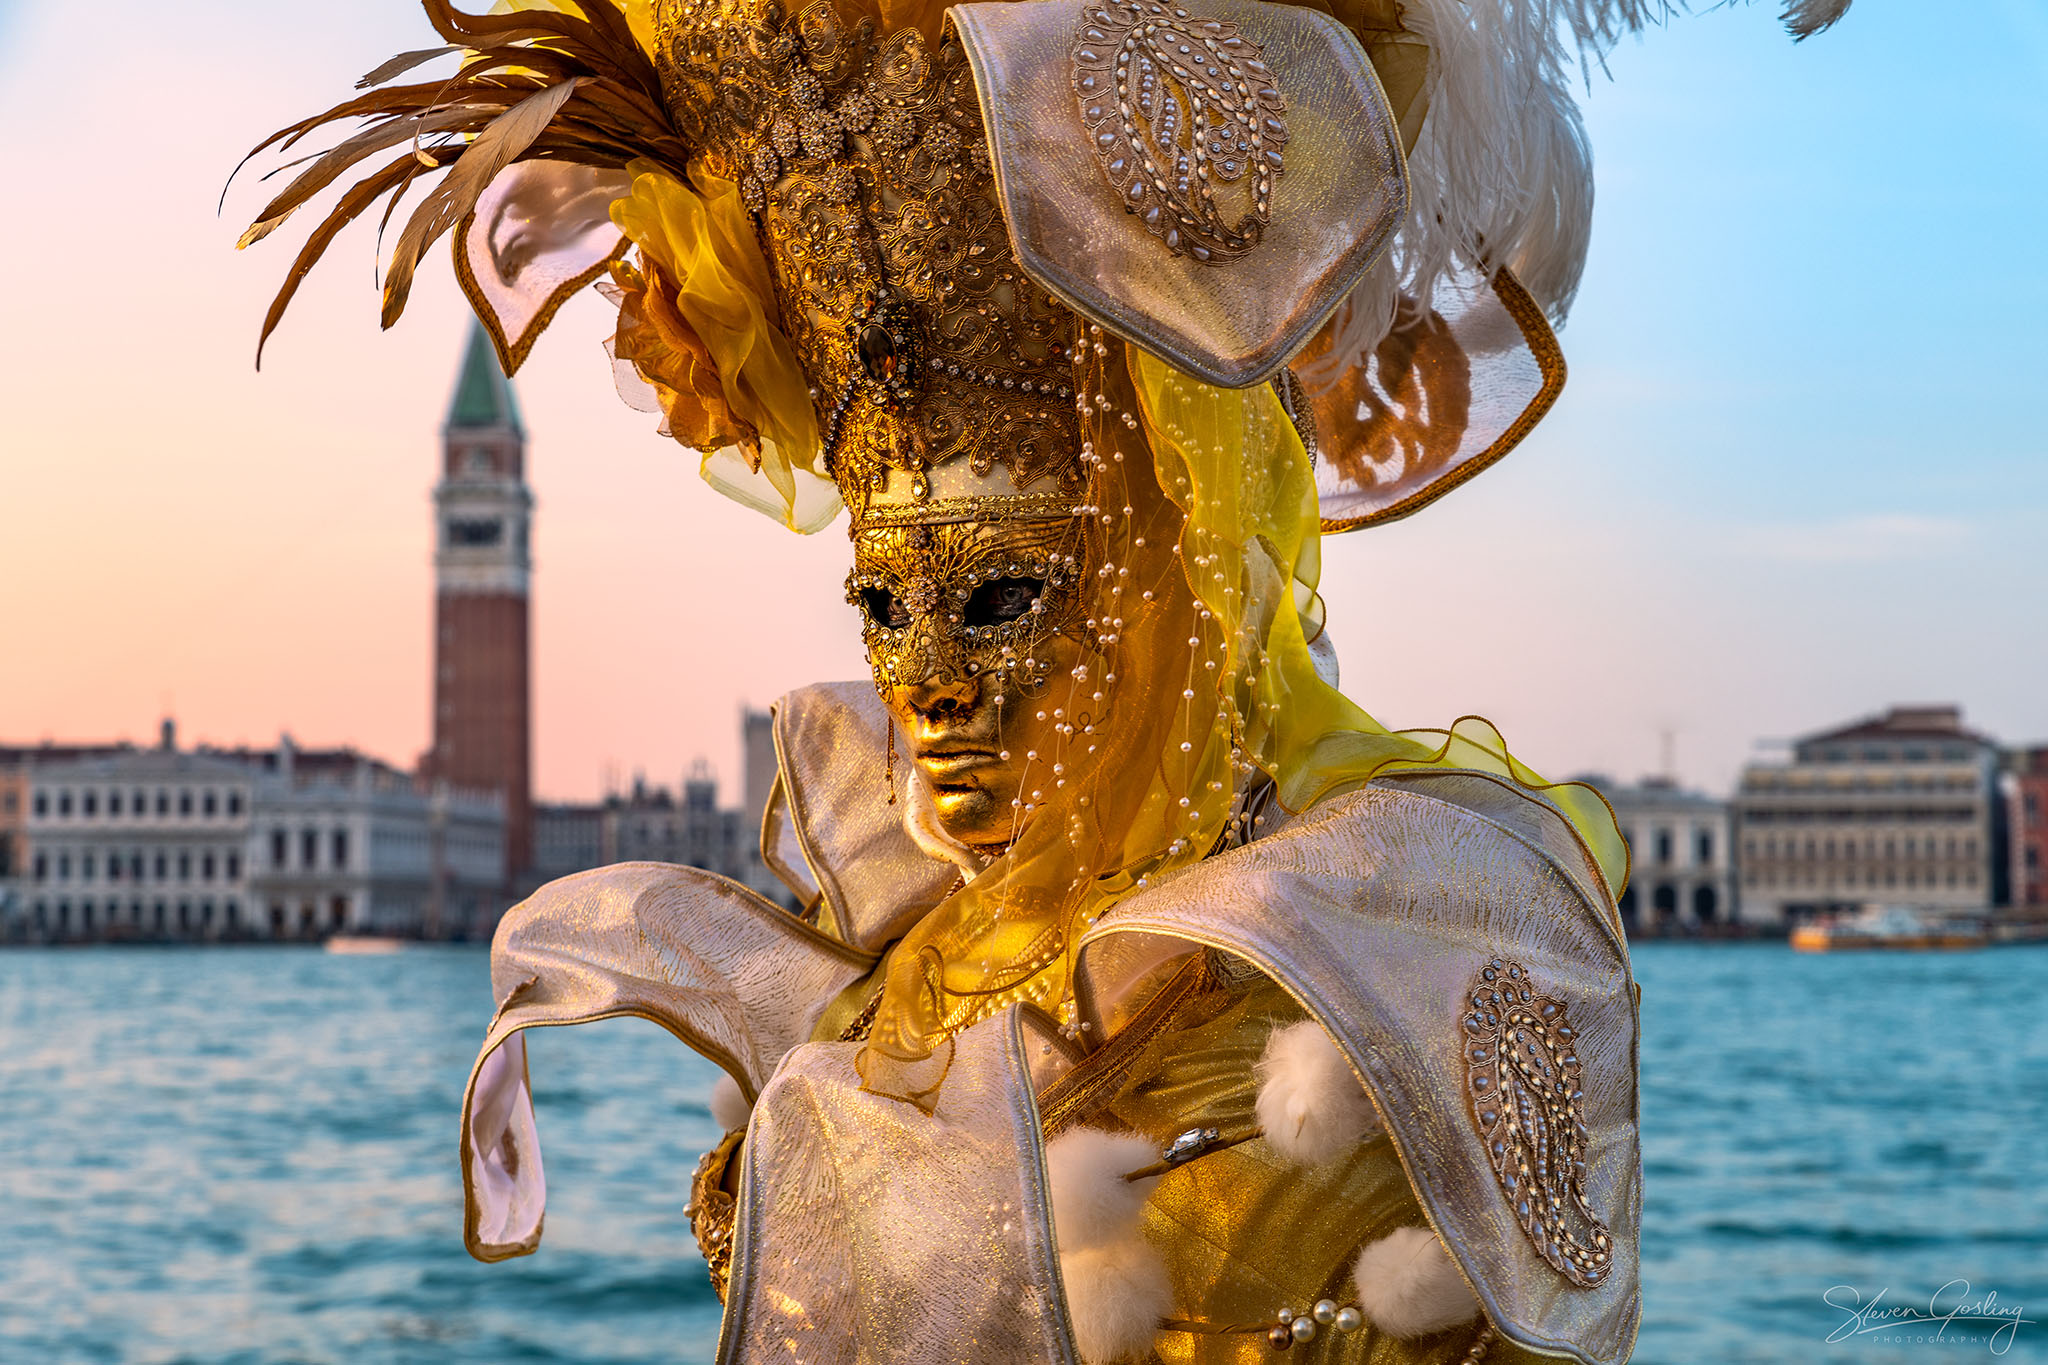 Ballet & Ball Gowns Photography Workshop at the Venice Carnival 169